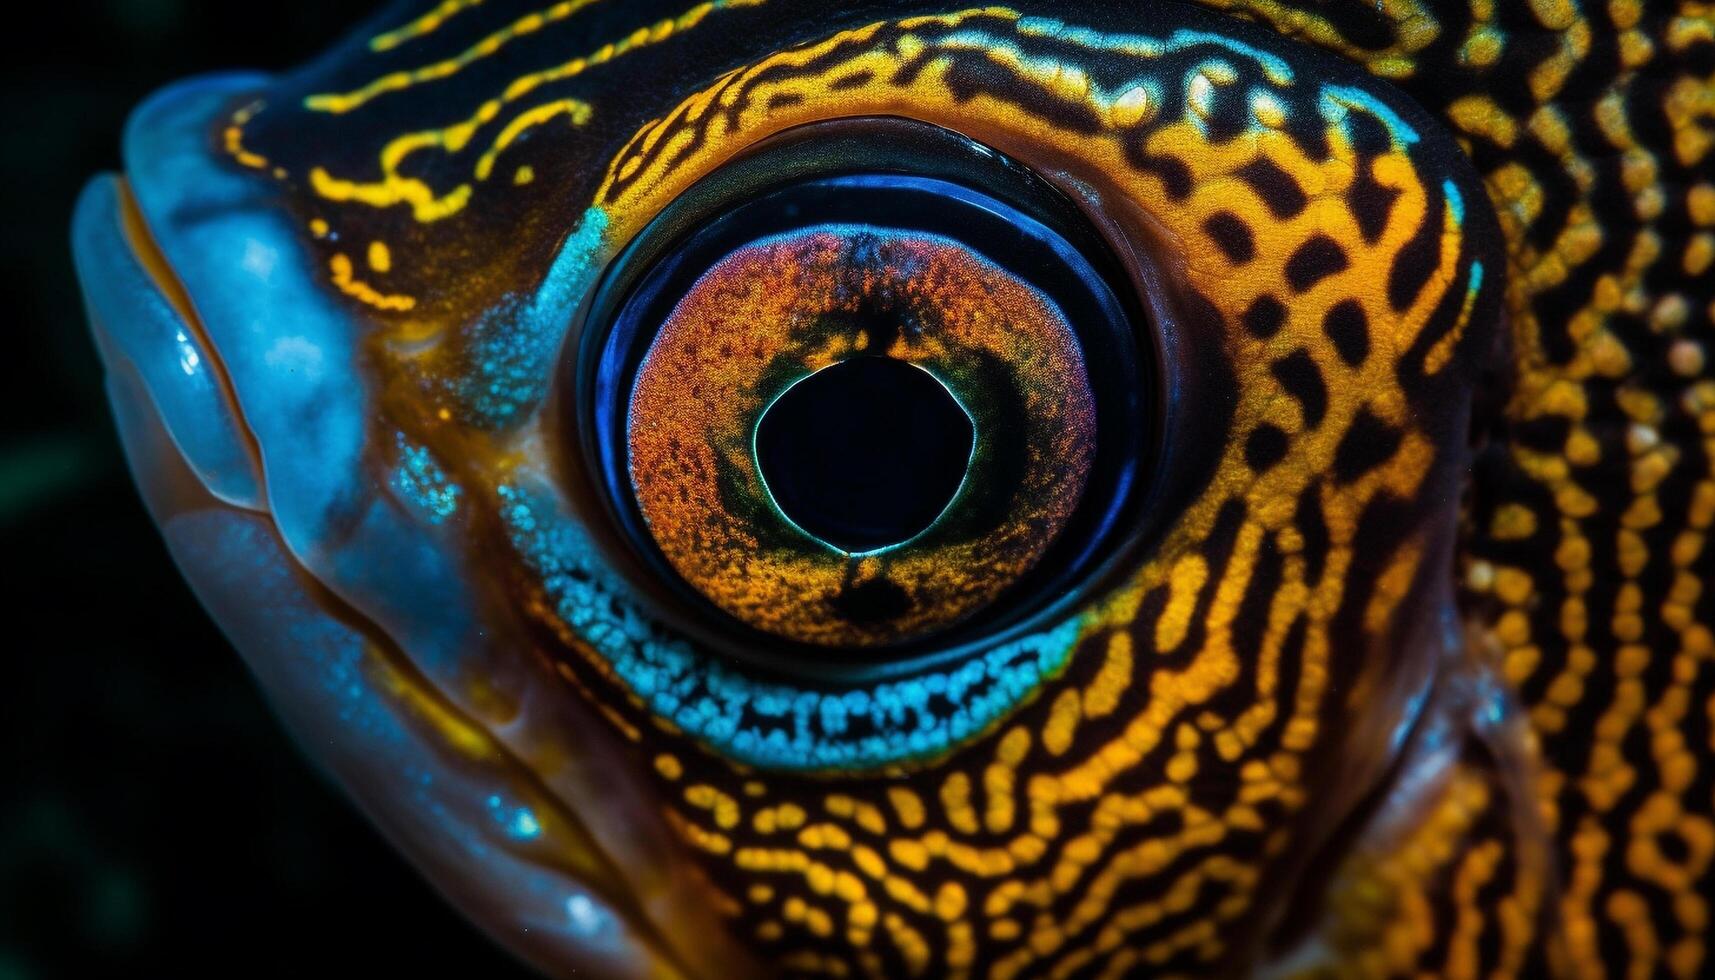 Vibrant colors of a tropical fish eye in extreme close up